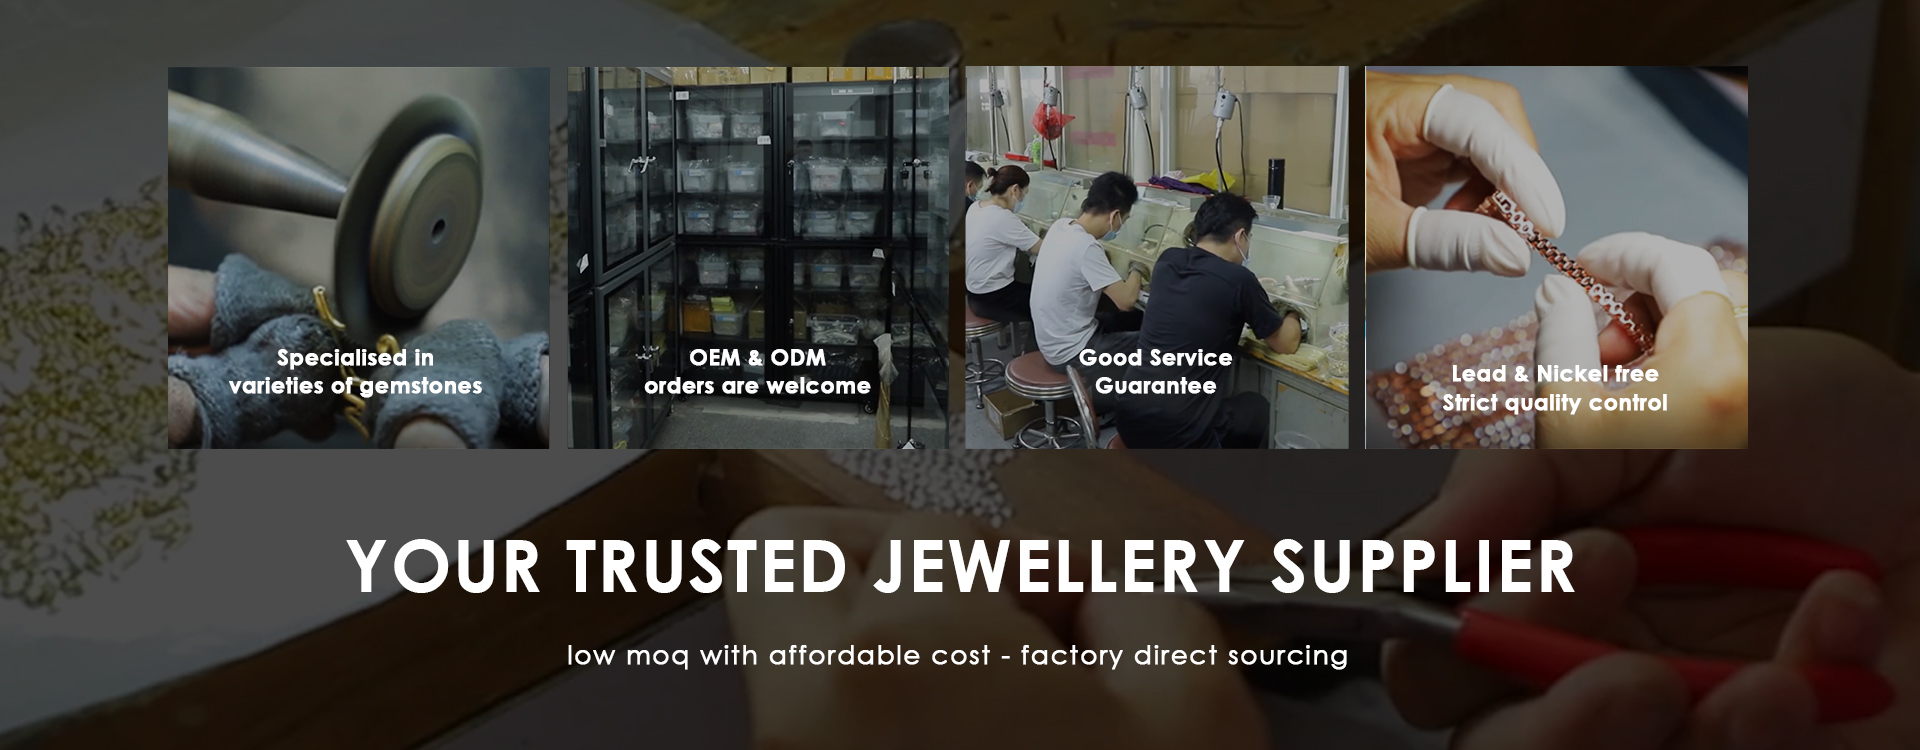 YOUR TRUSTED JEWELLERY SUPPLIER